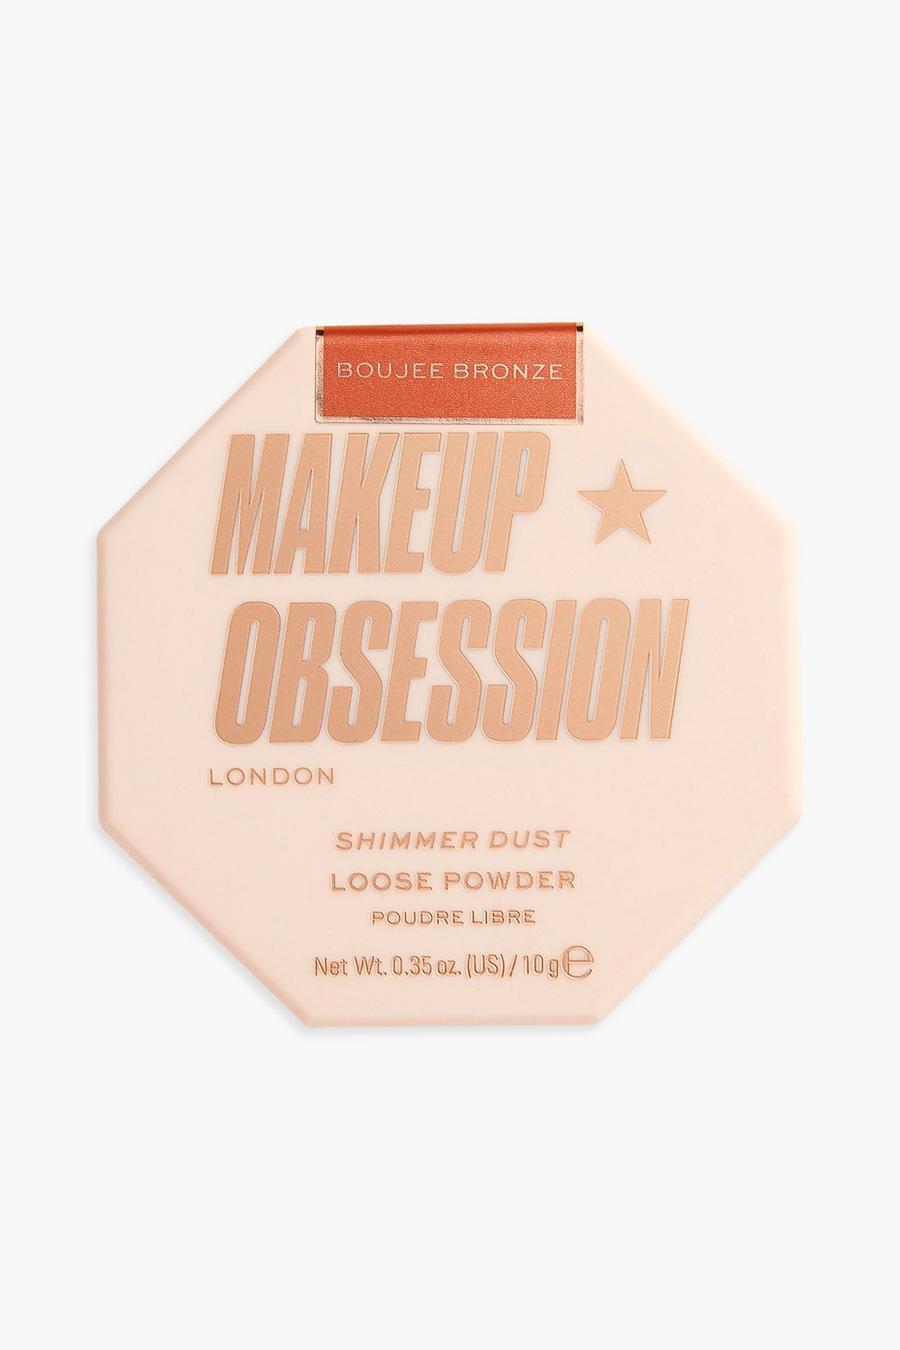 Makeup Obsession Shimmer Dust Boujee Bronze - Polvere illuminante, Multi multicolor image number 1